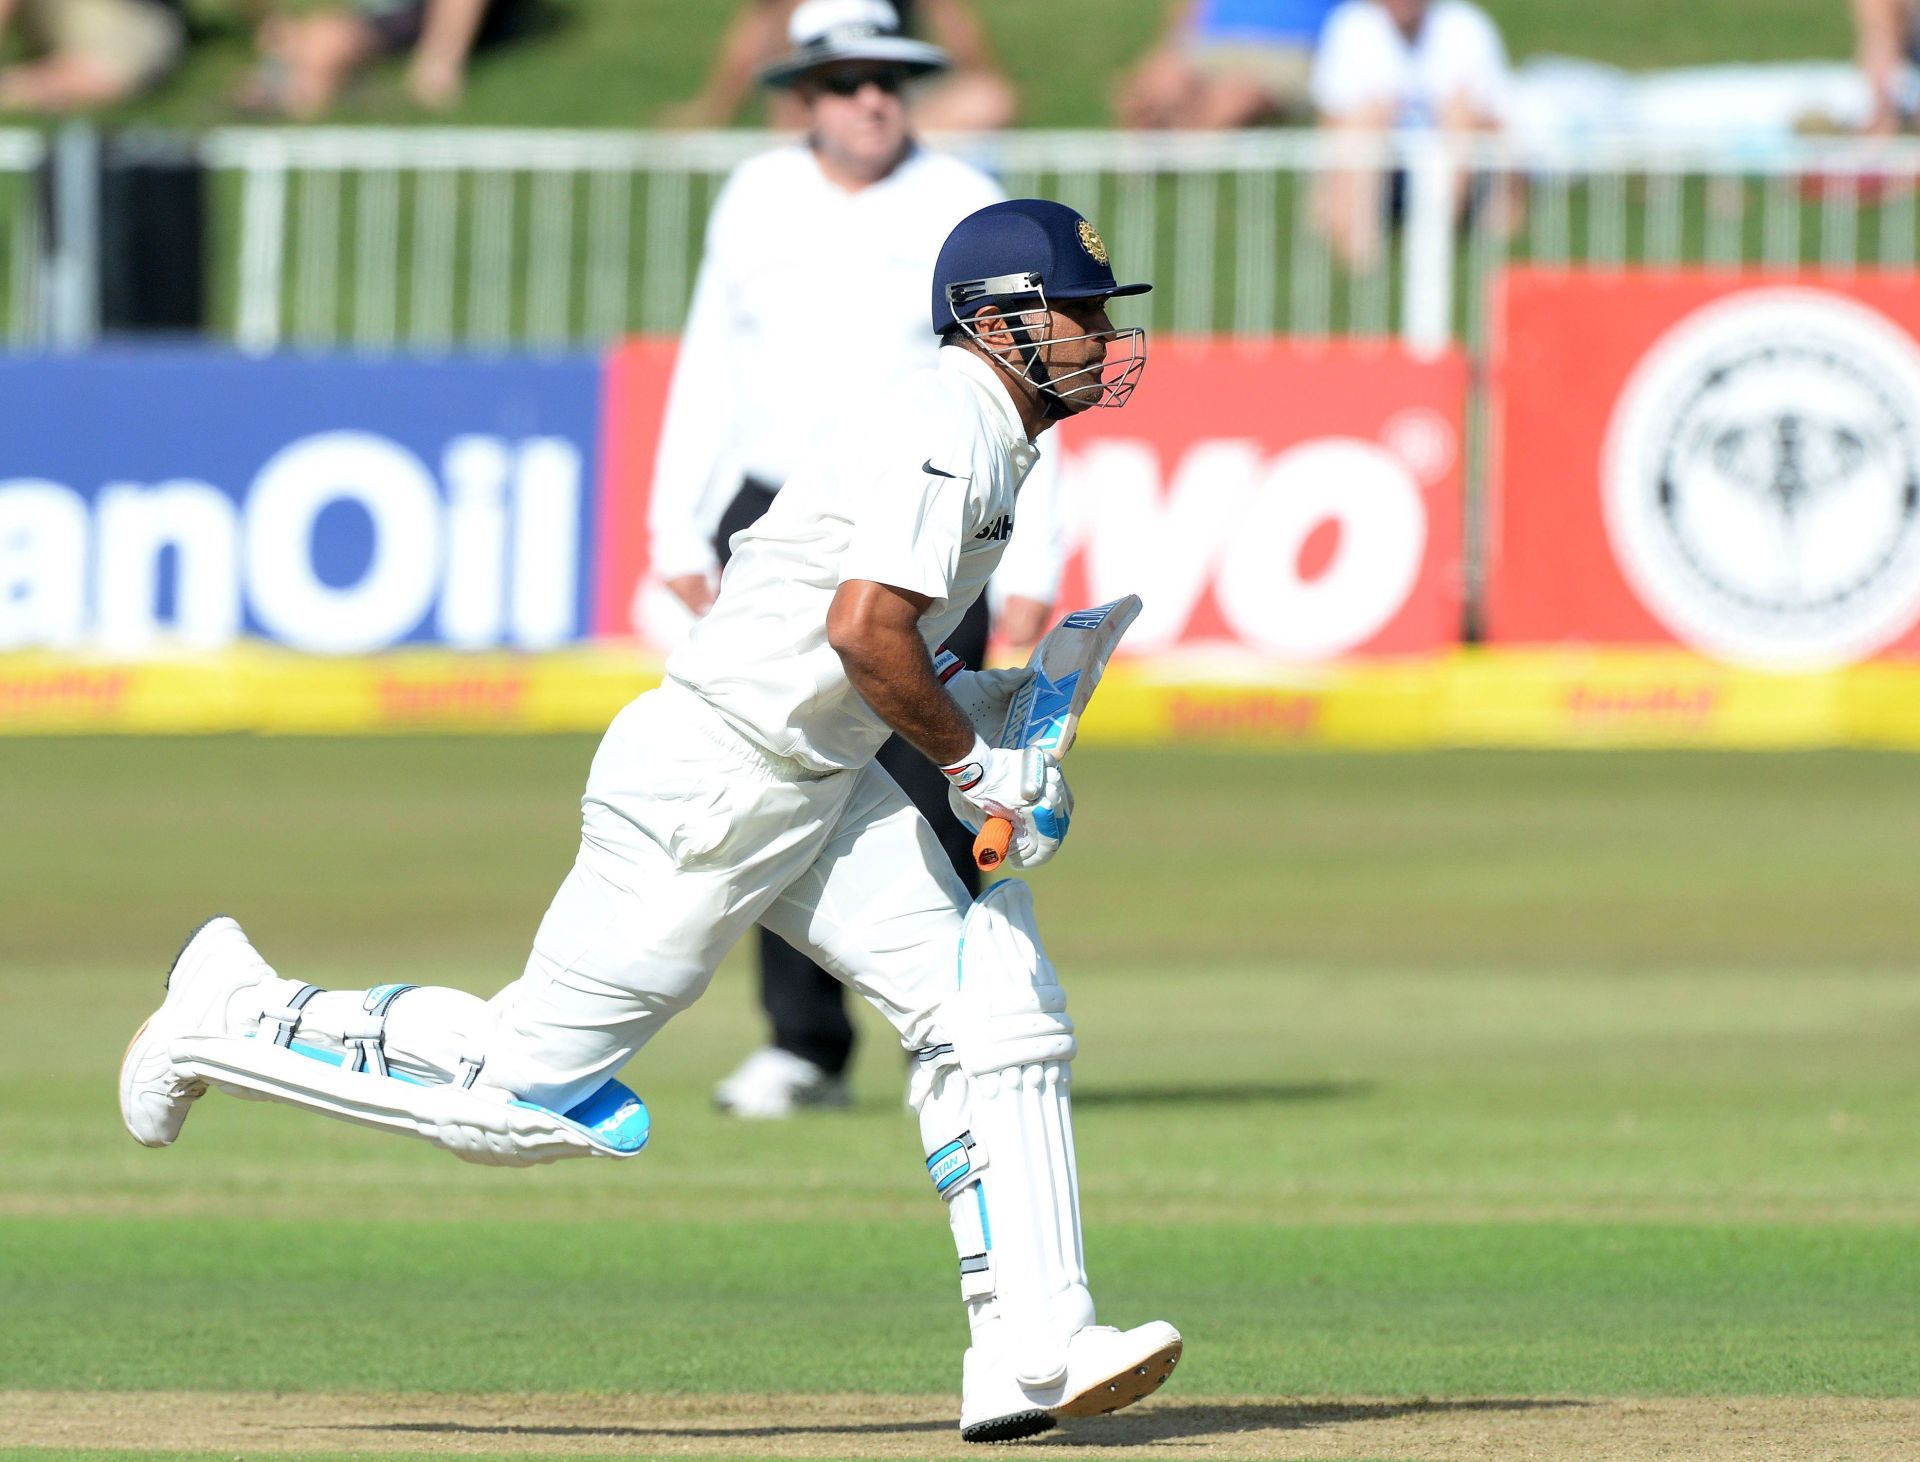 Dhoni has hit the second most number of sixes for team India in Test cricket